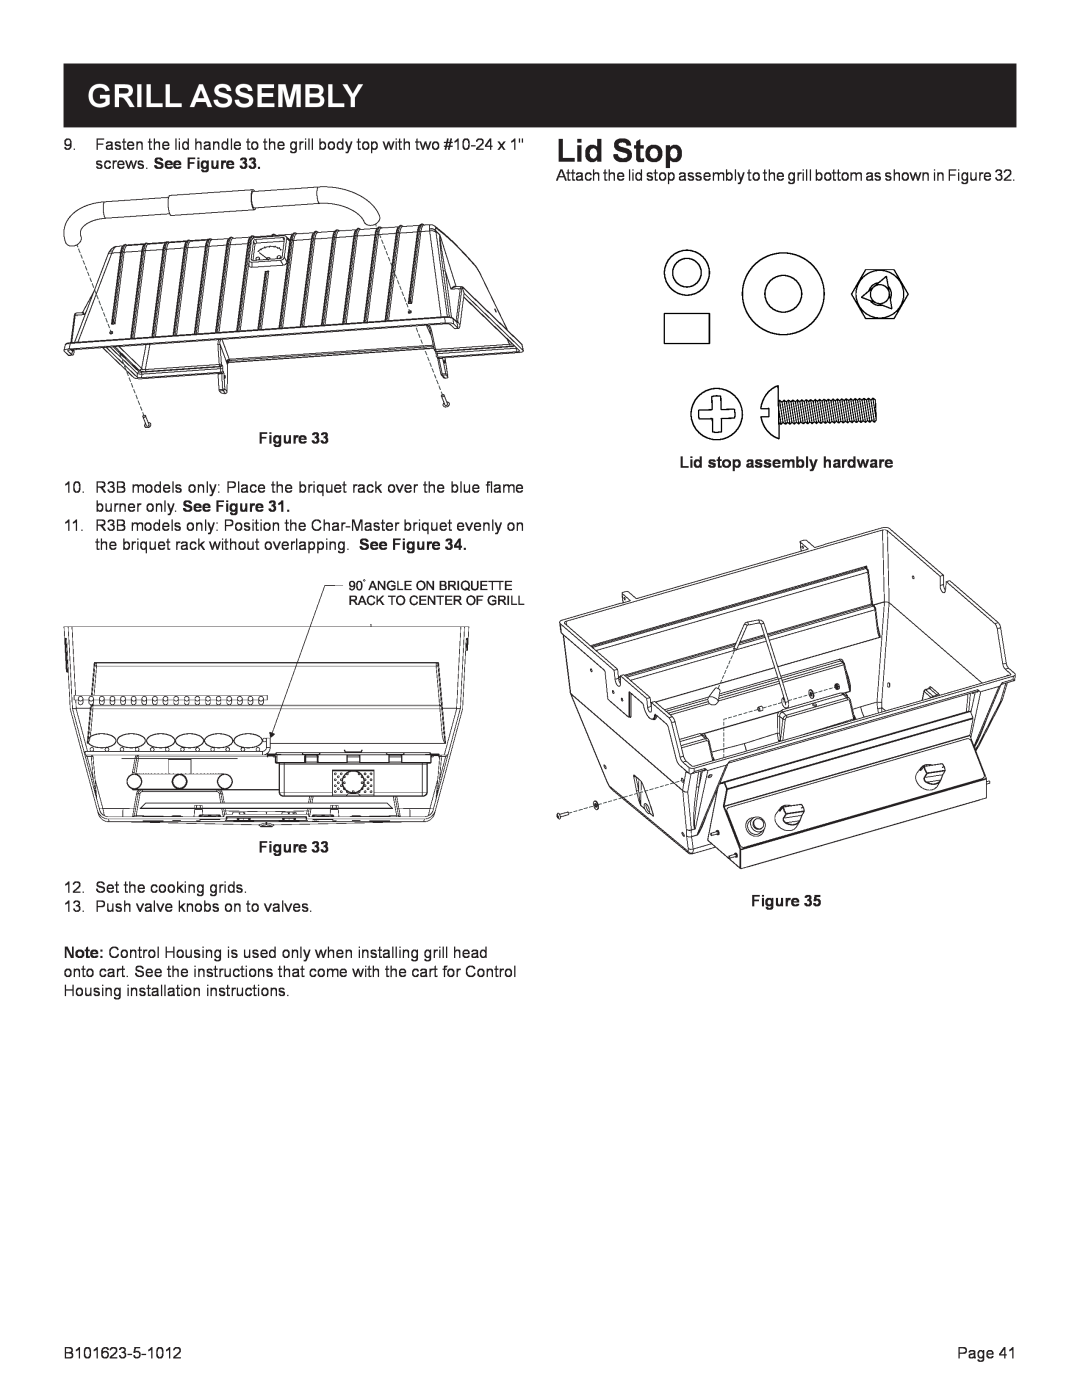 Broilmaster P3SX-1, H4X-1 Grill Assembly, Lid Stop, Lid stop assembly hardware, Angle On Briquette Rack To Center Of Grill 